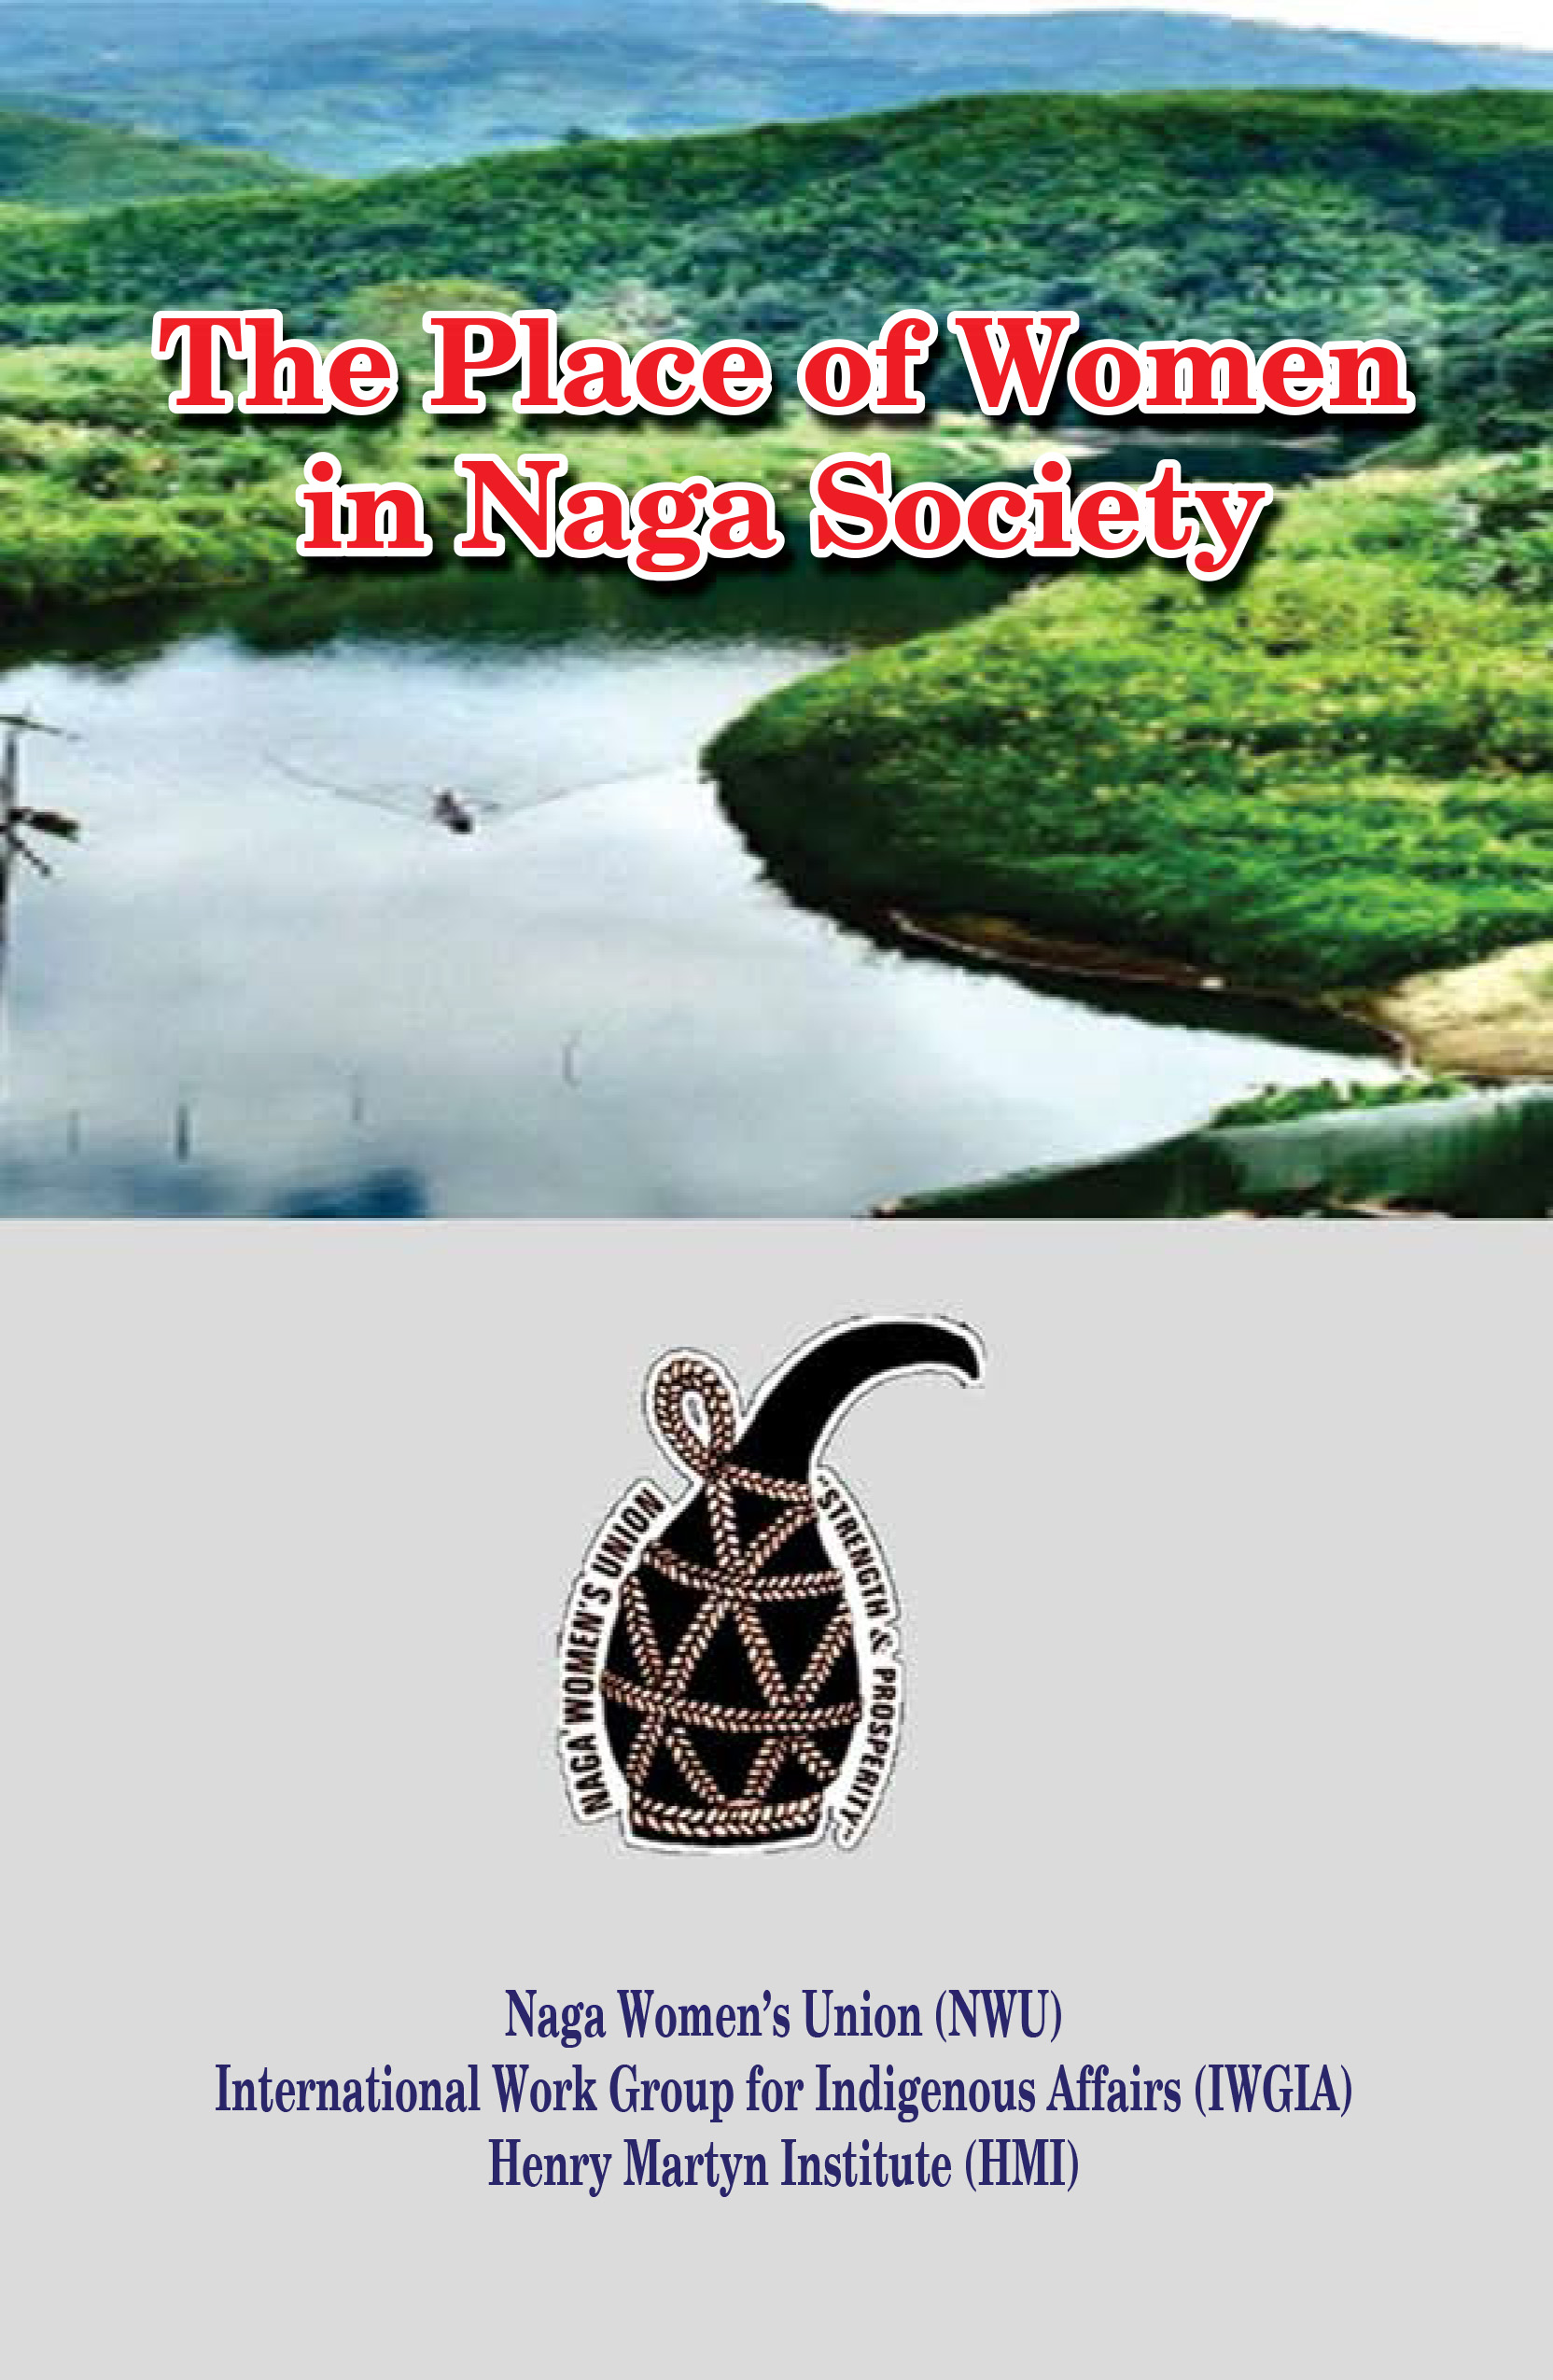 The main purpose of this book is to discuss Naga society and its cultural practices with a specific focus on the status of women. 